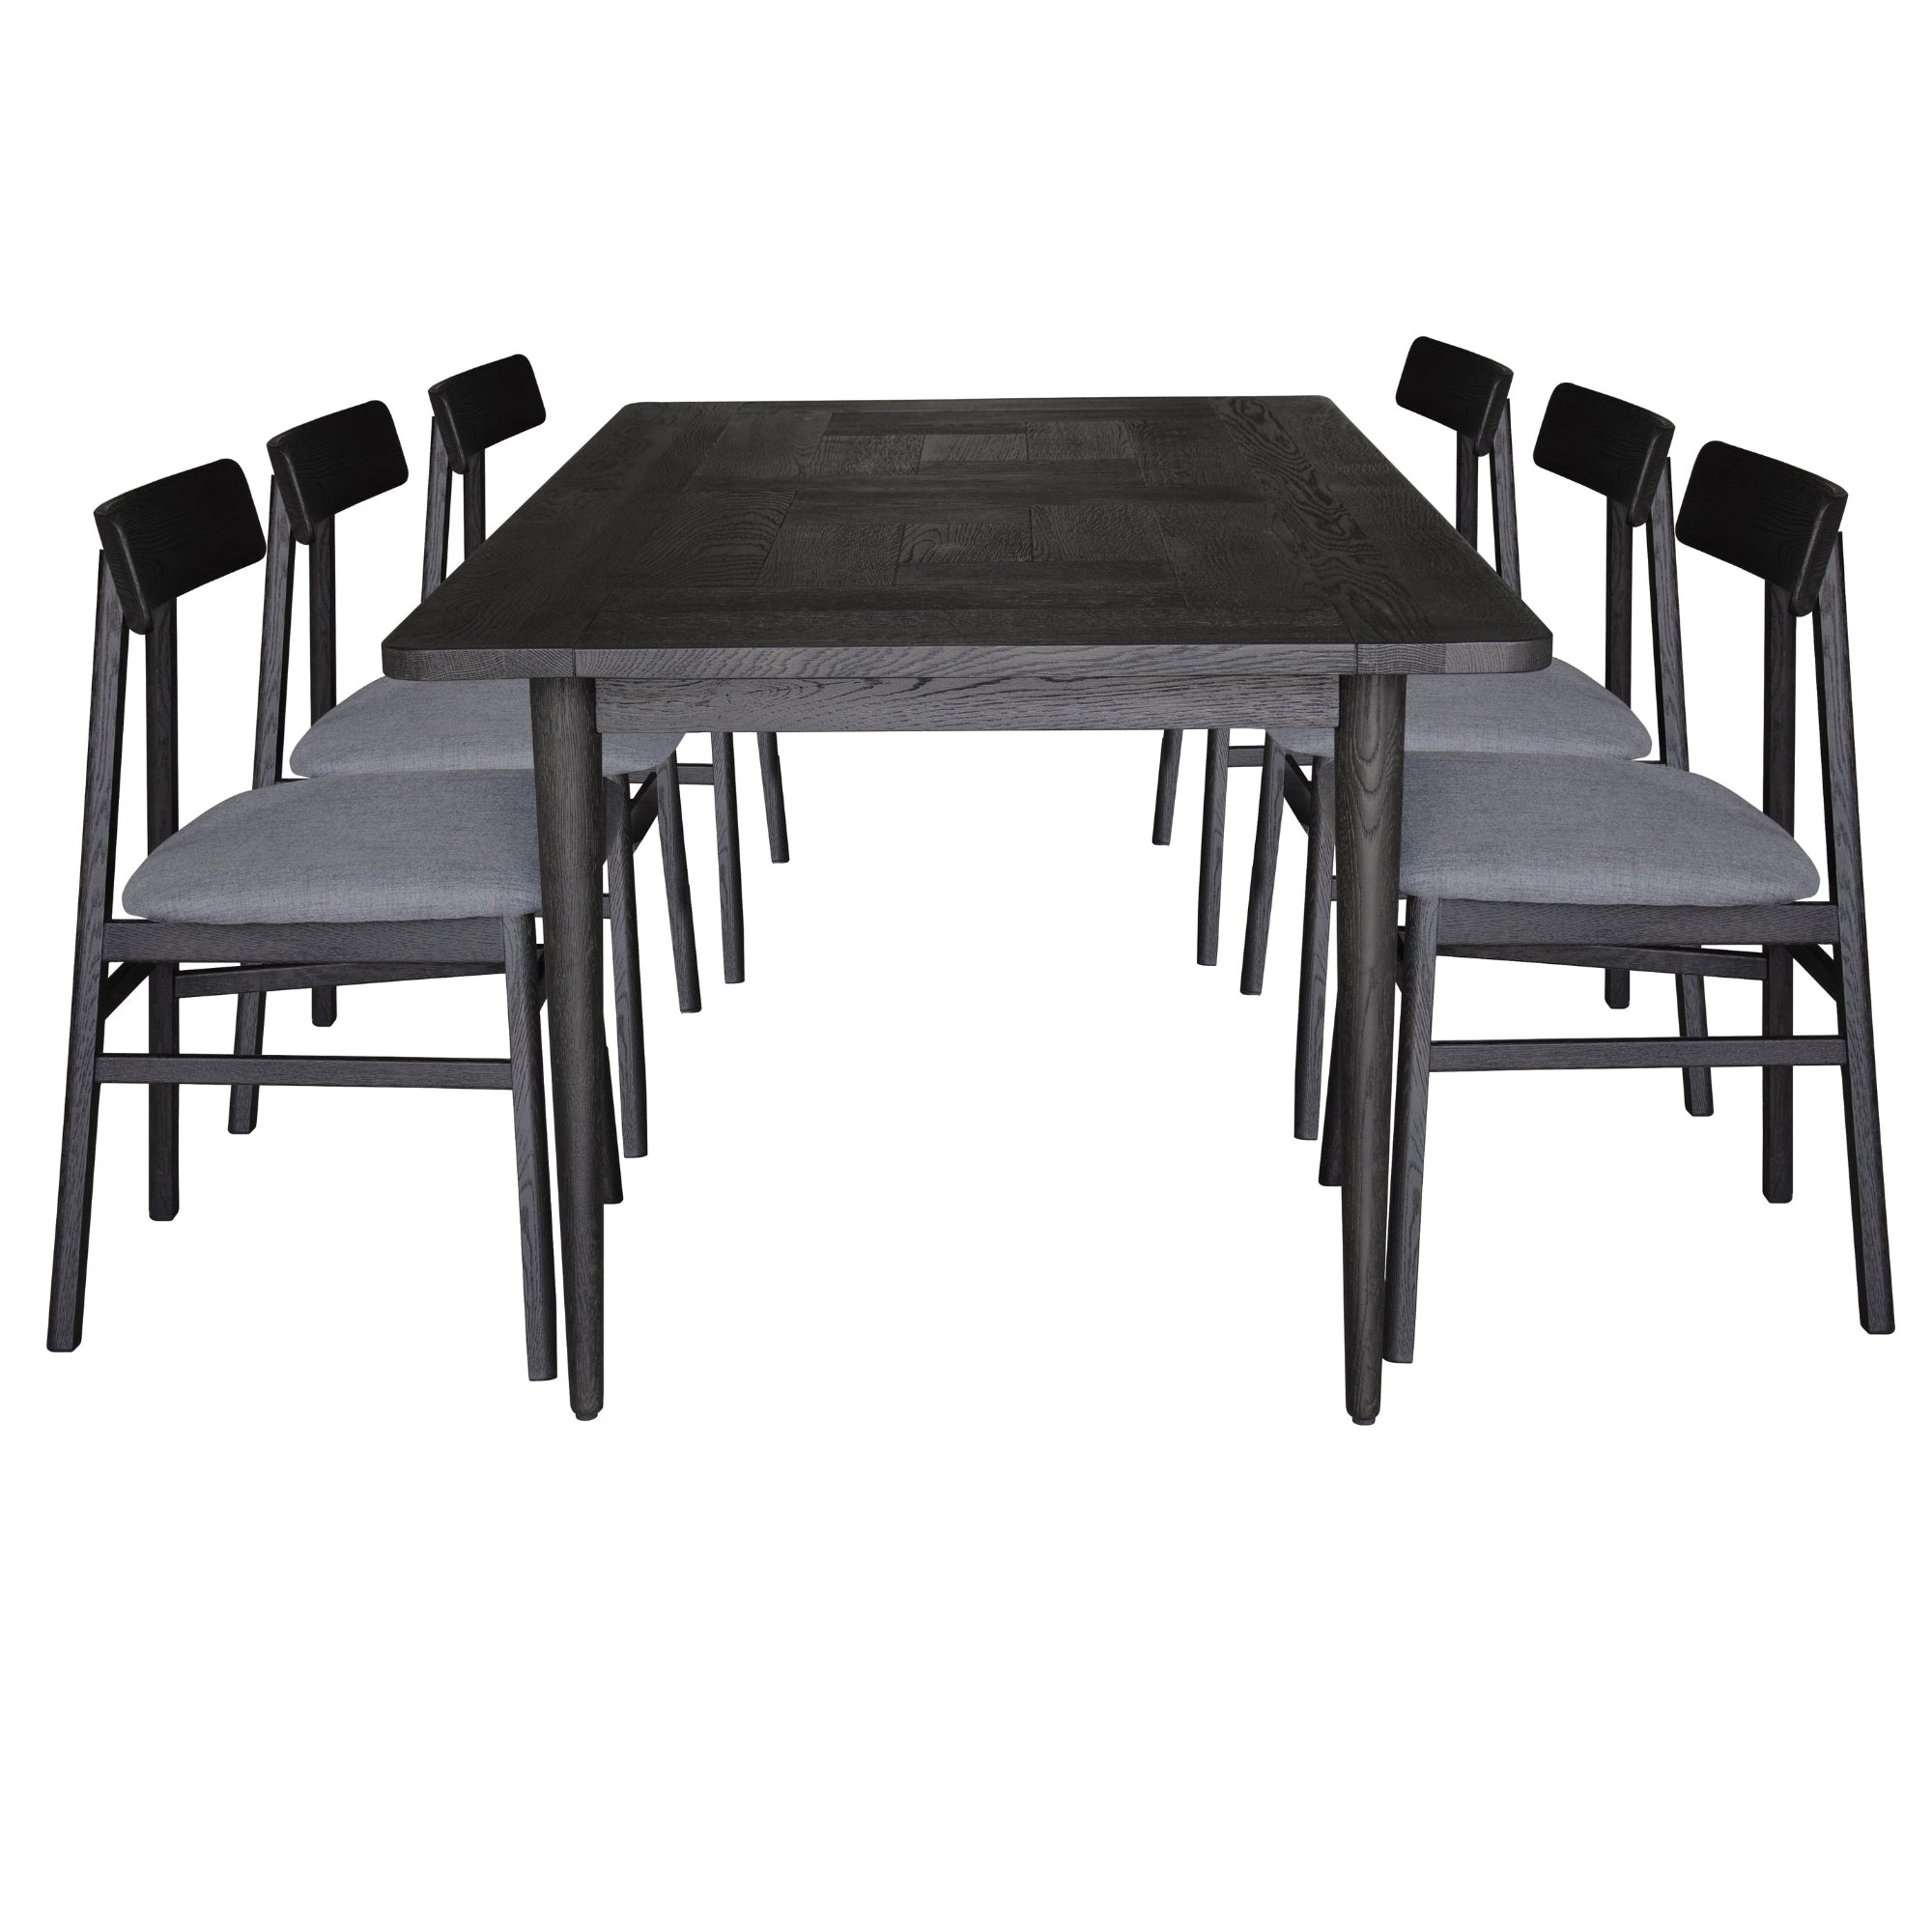 7pc Solid Oak Dining Set w/ Fabric Seats, 180cm Table